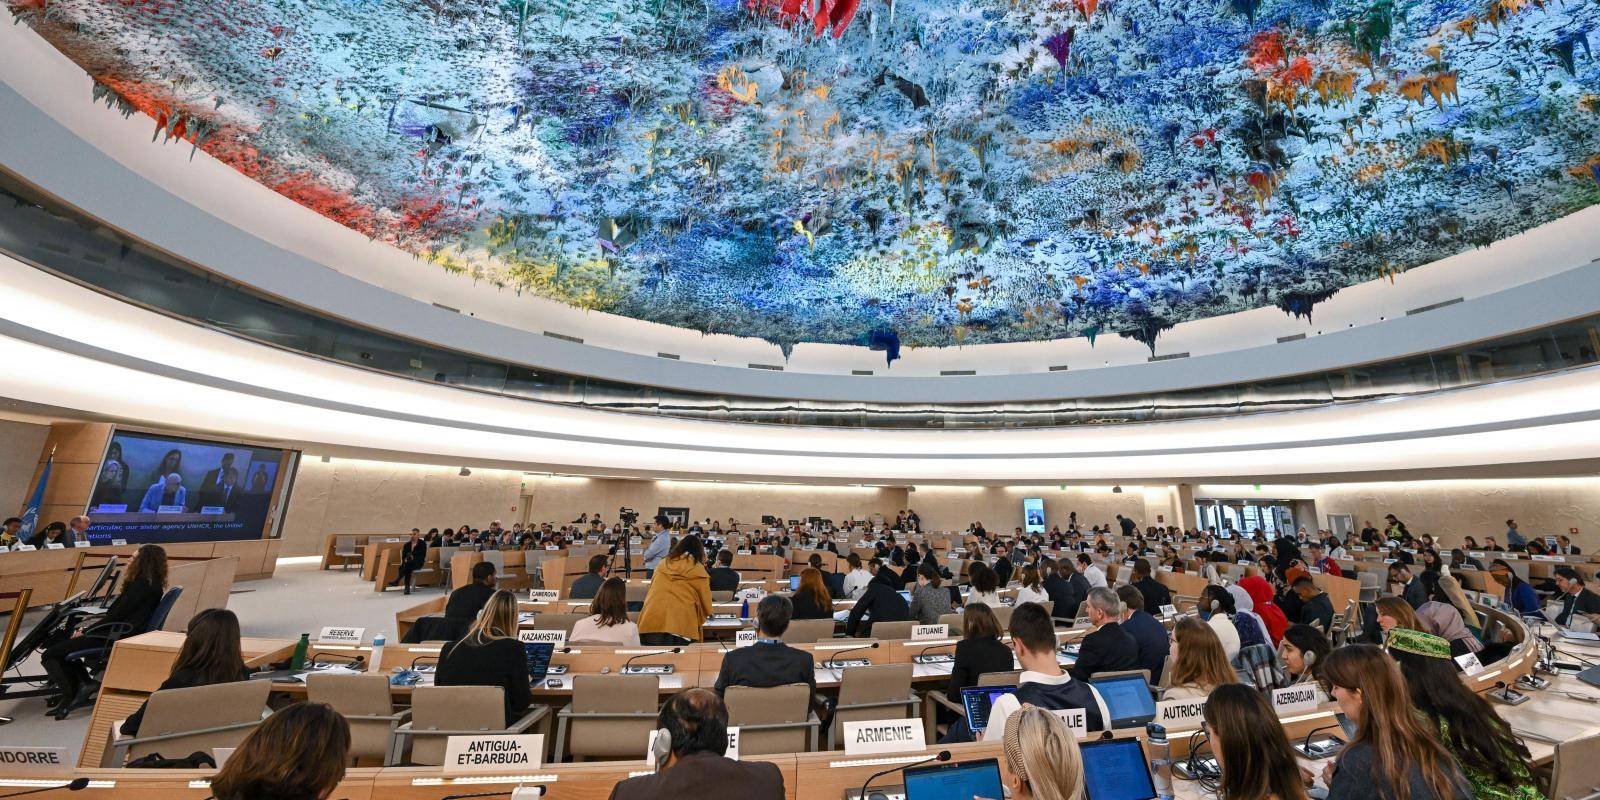 Delegates sit at desks under the multicoloured and textured ceiling of the Human Rights and Alliance of Civilizations room at the UN headquarters in Geneva, Switzerland.